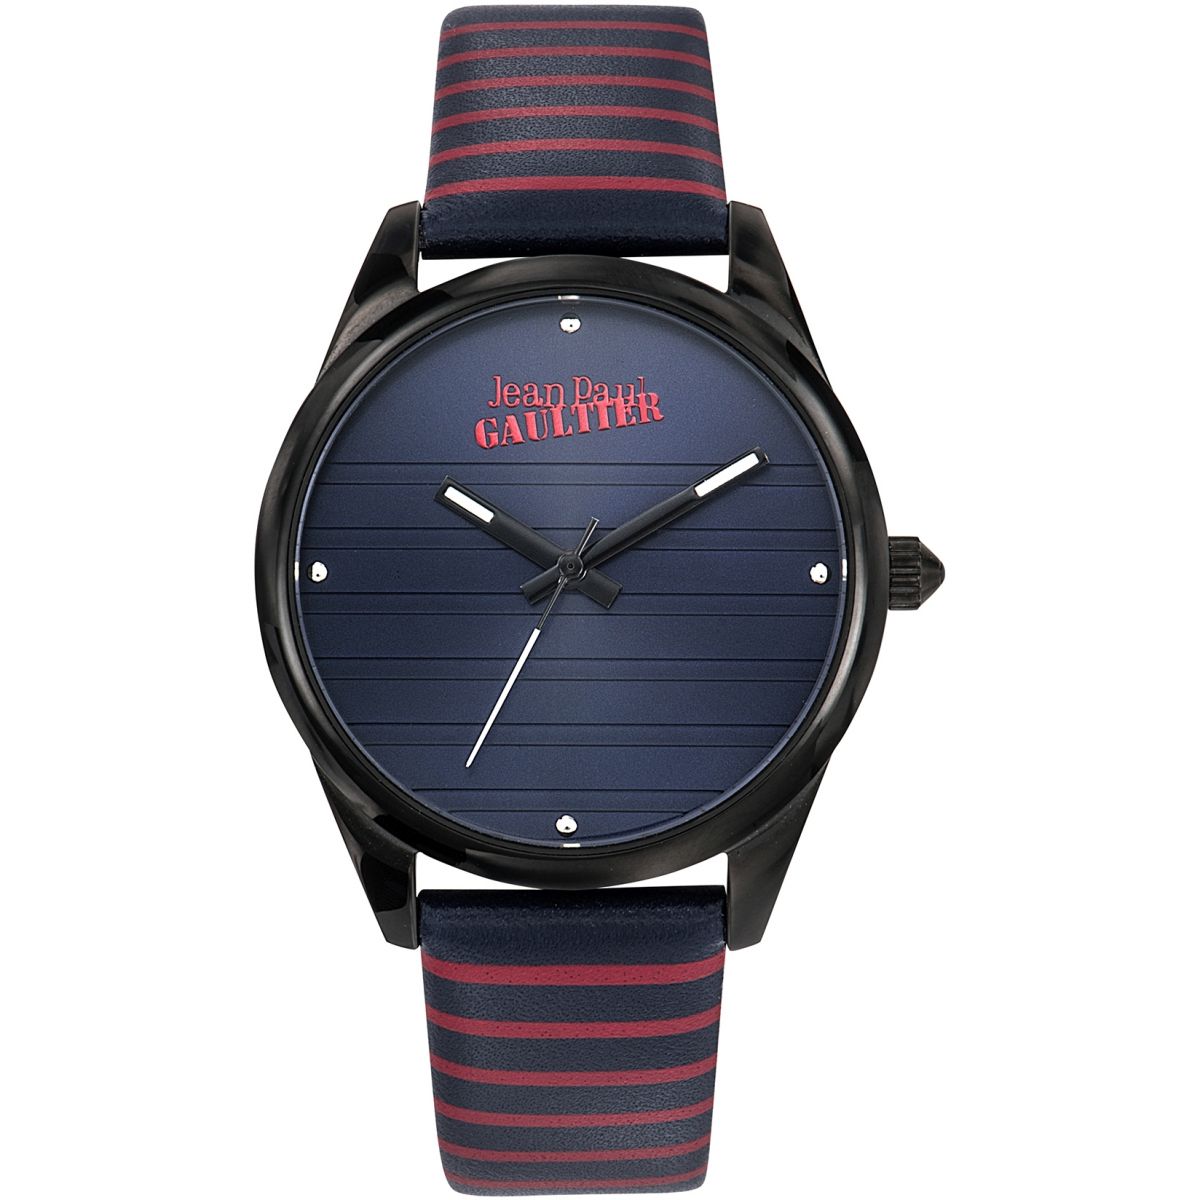 Jean-Paul-Gaultier-Watches-Man-For-Himself-3